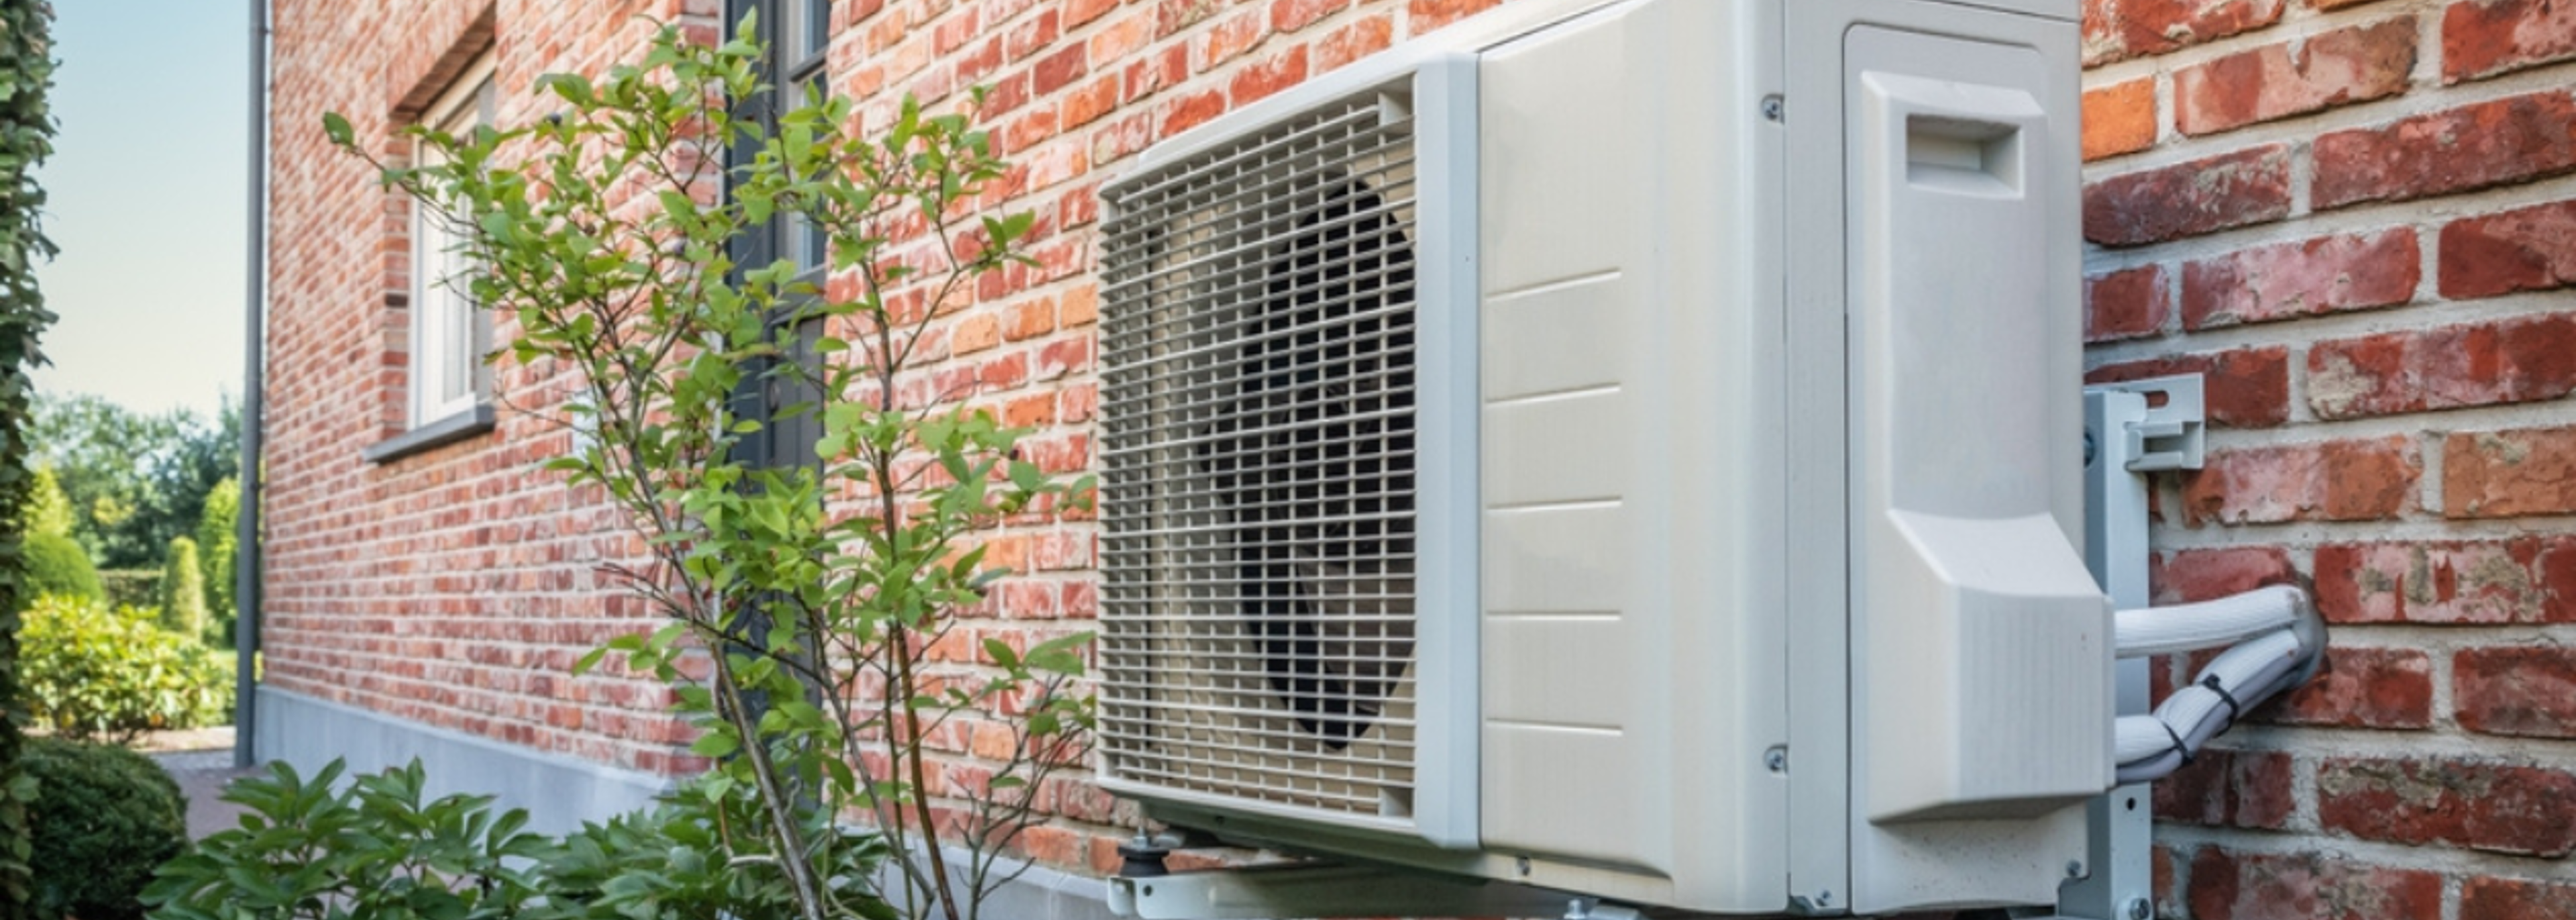 Fewer than half the projected heat pumps installed by end of 2023